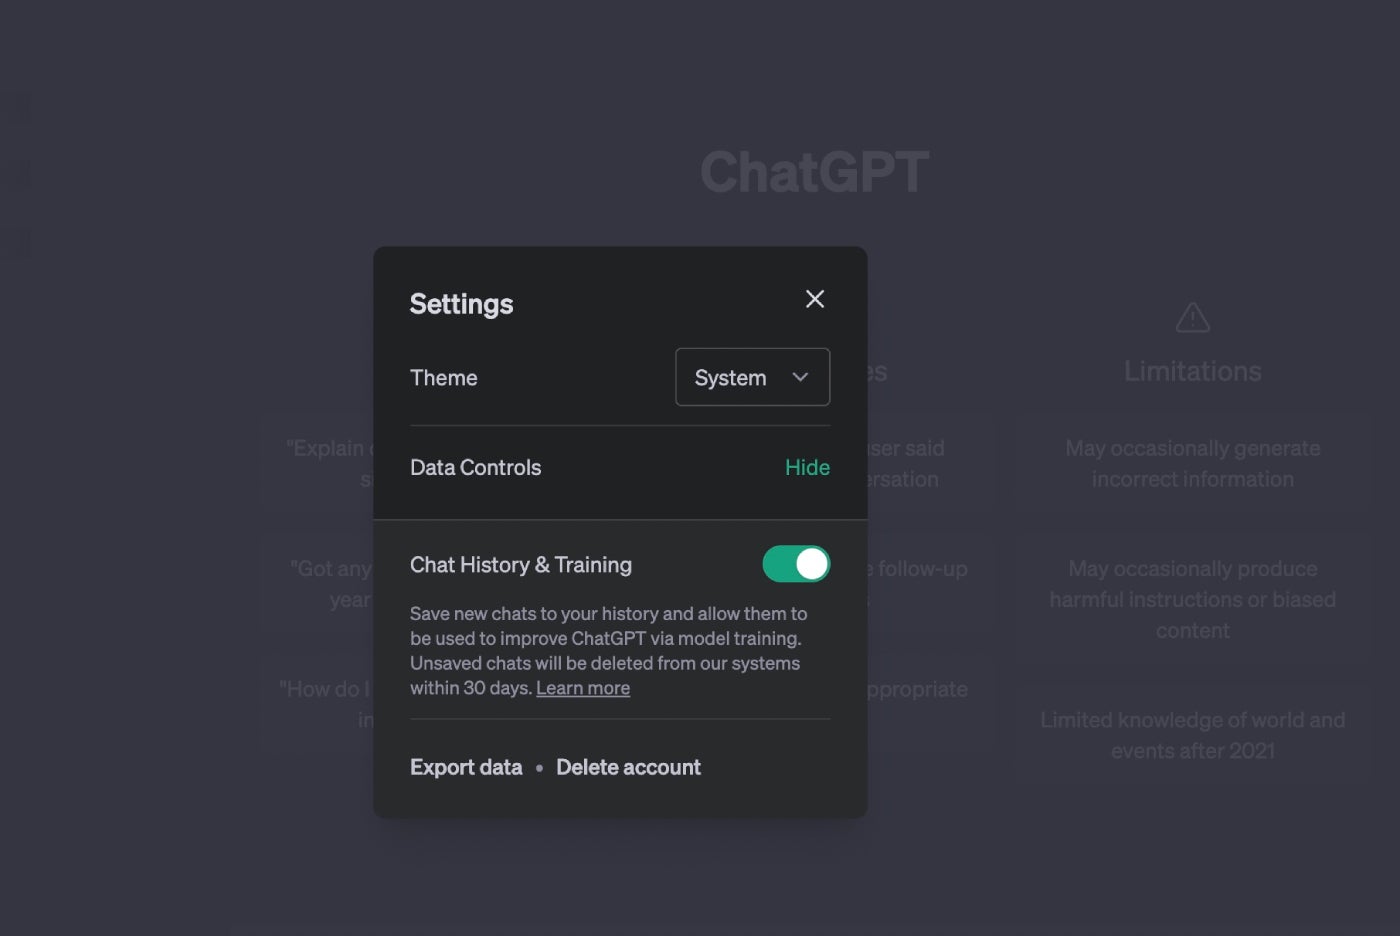 OpenAI added the Chat History & Training setting to ChatGPT in April.